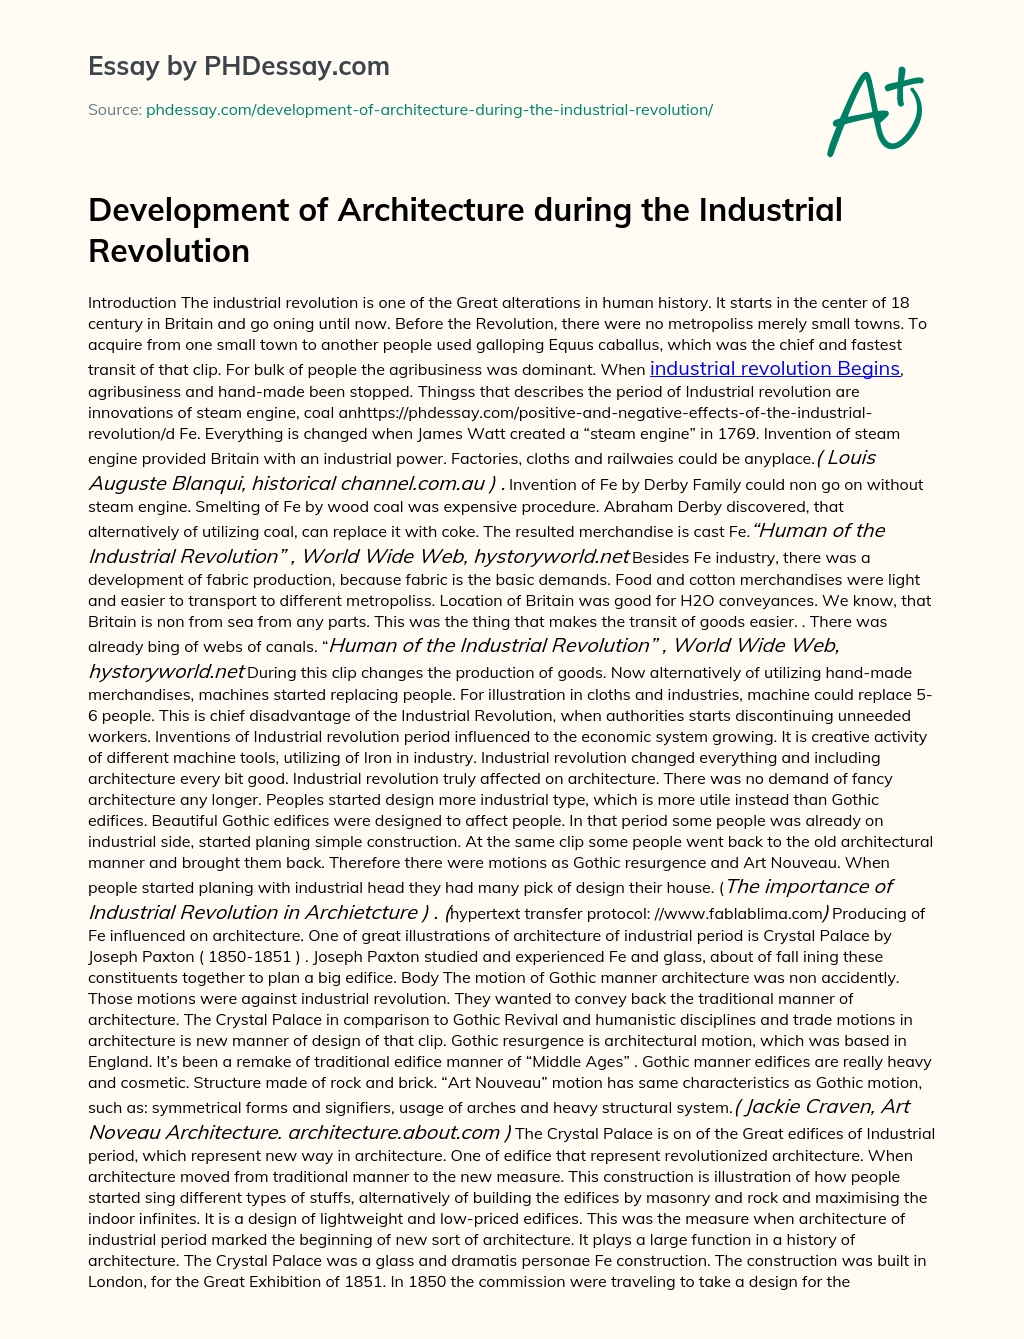 Development of Architecture During the Industrial Revolution essay